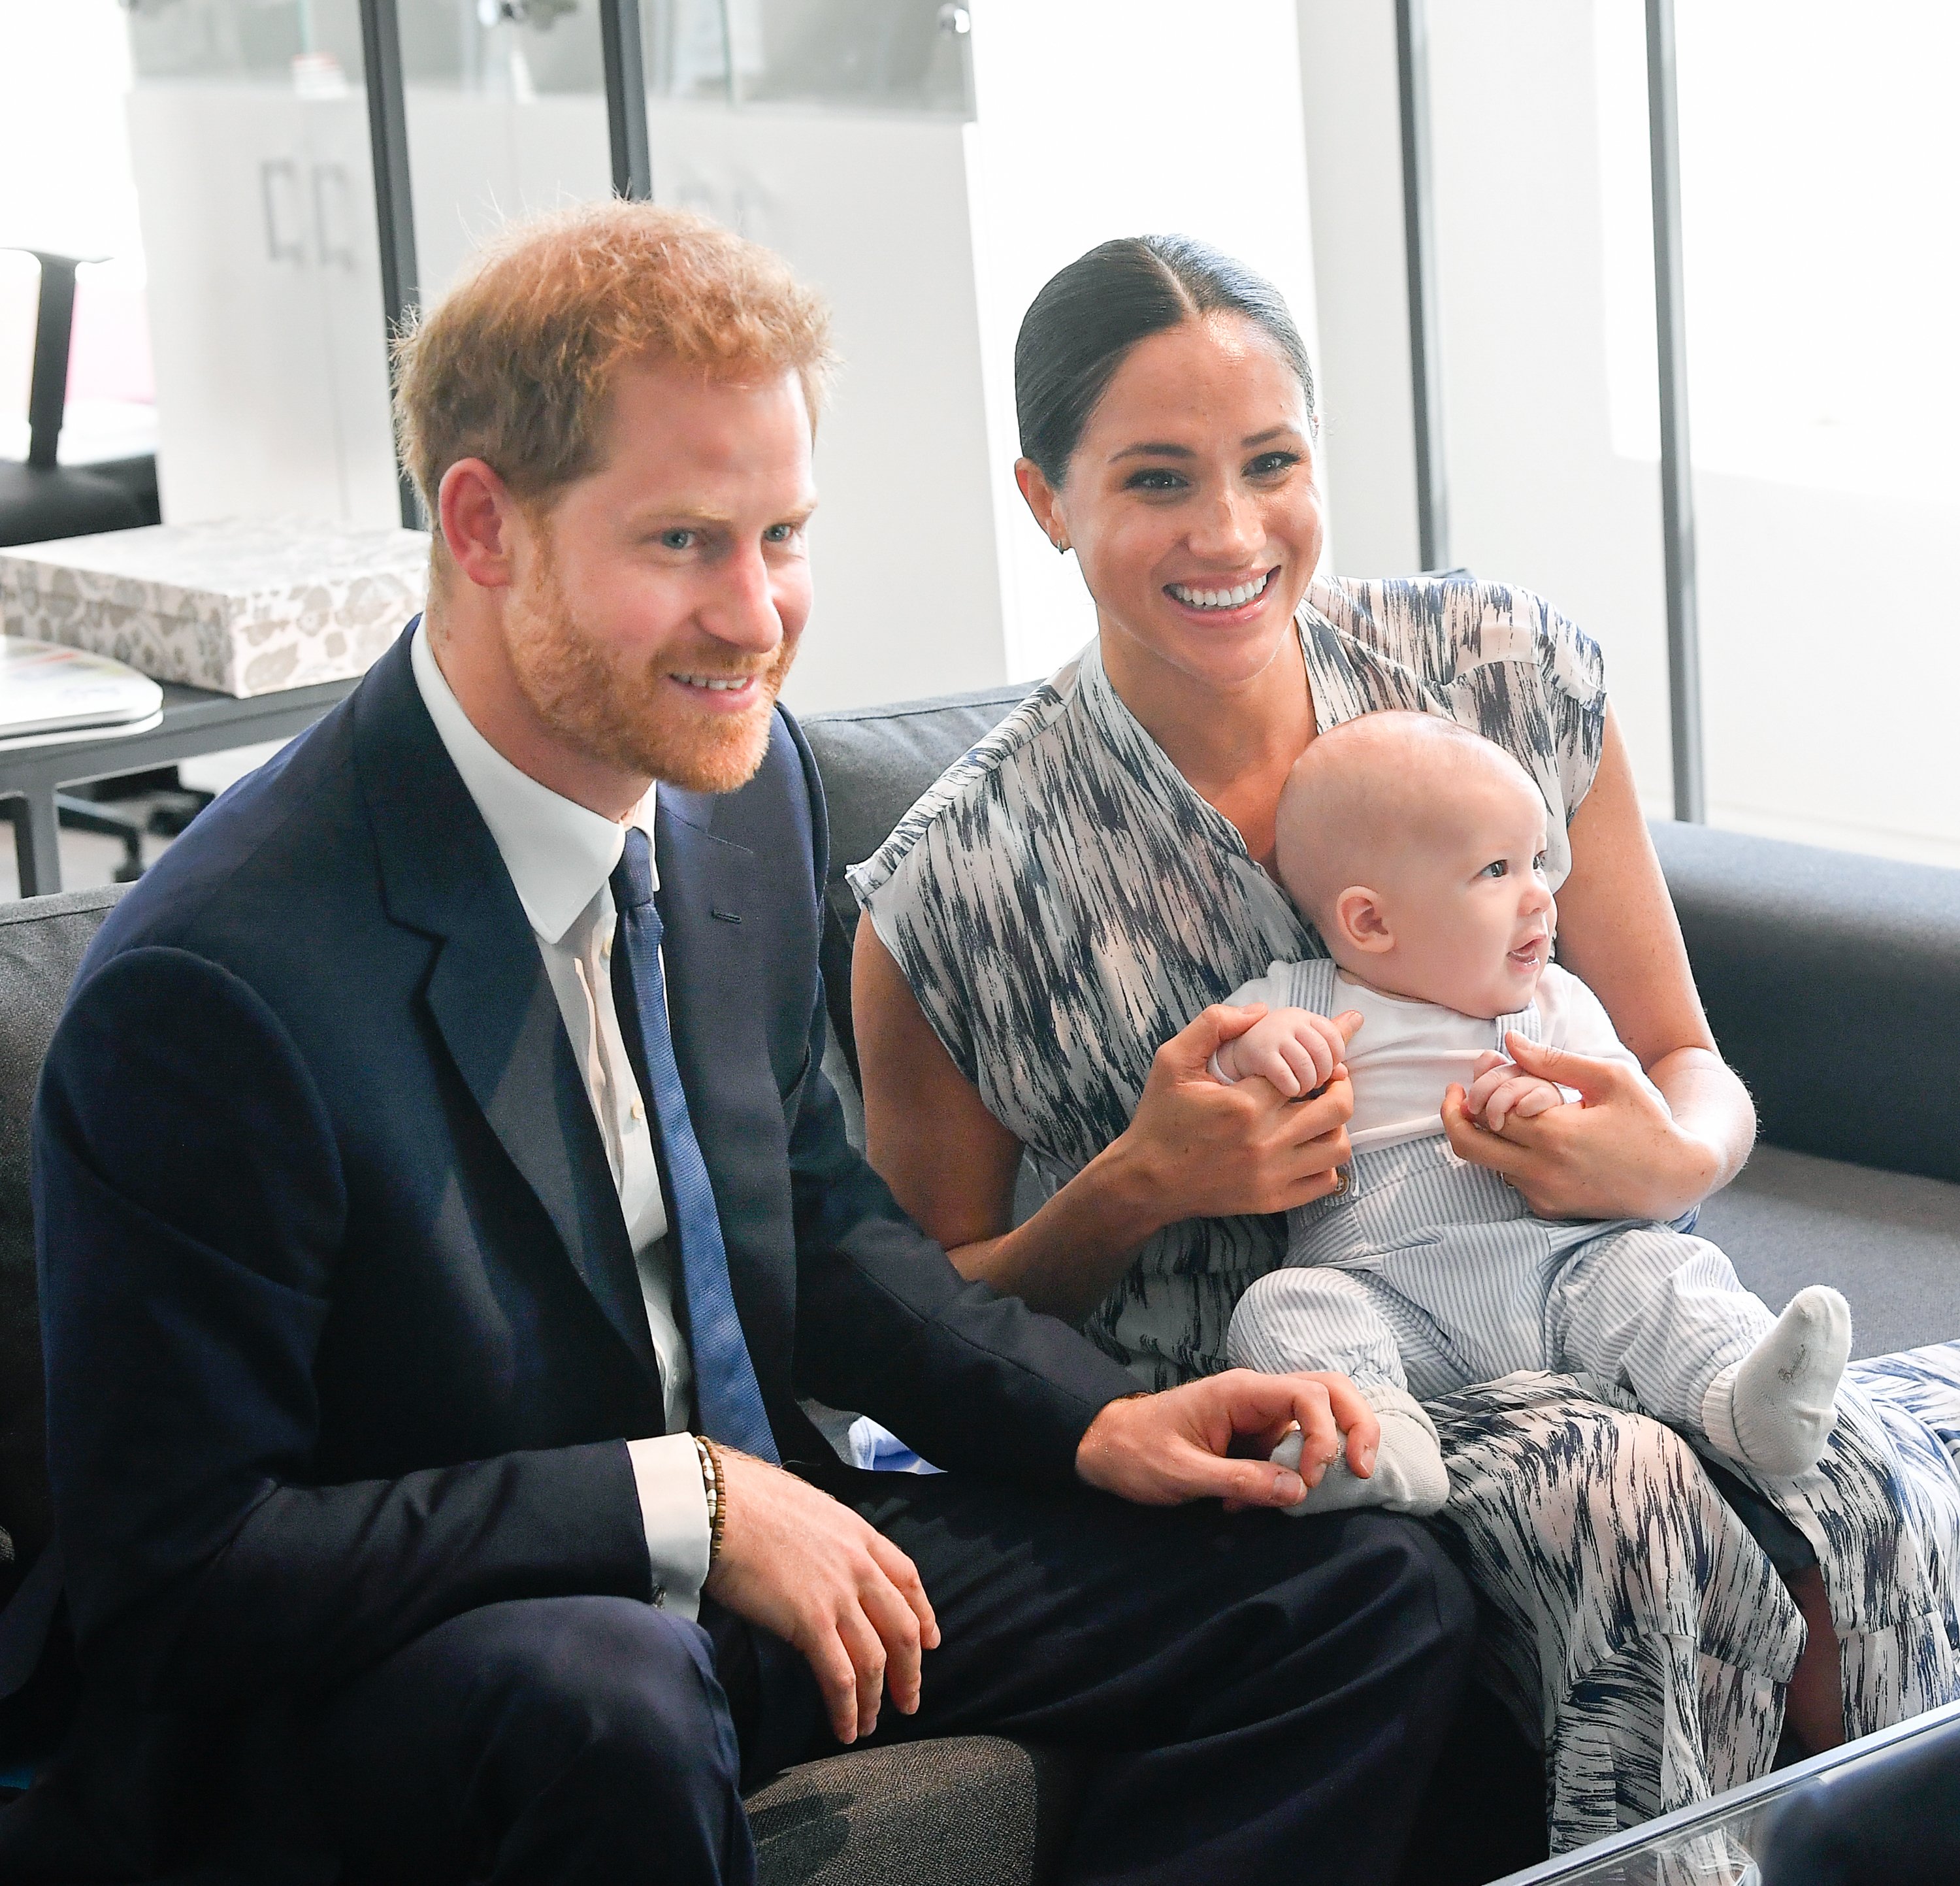 Prince Harry, Meghan Markle and their baby son Archie Mountbatten-Windsor during their royal tour of South Africa on September 25, 2019 in Cape Town, South Africa | Source: Getty Images